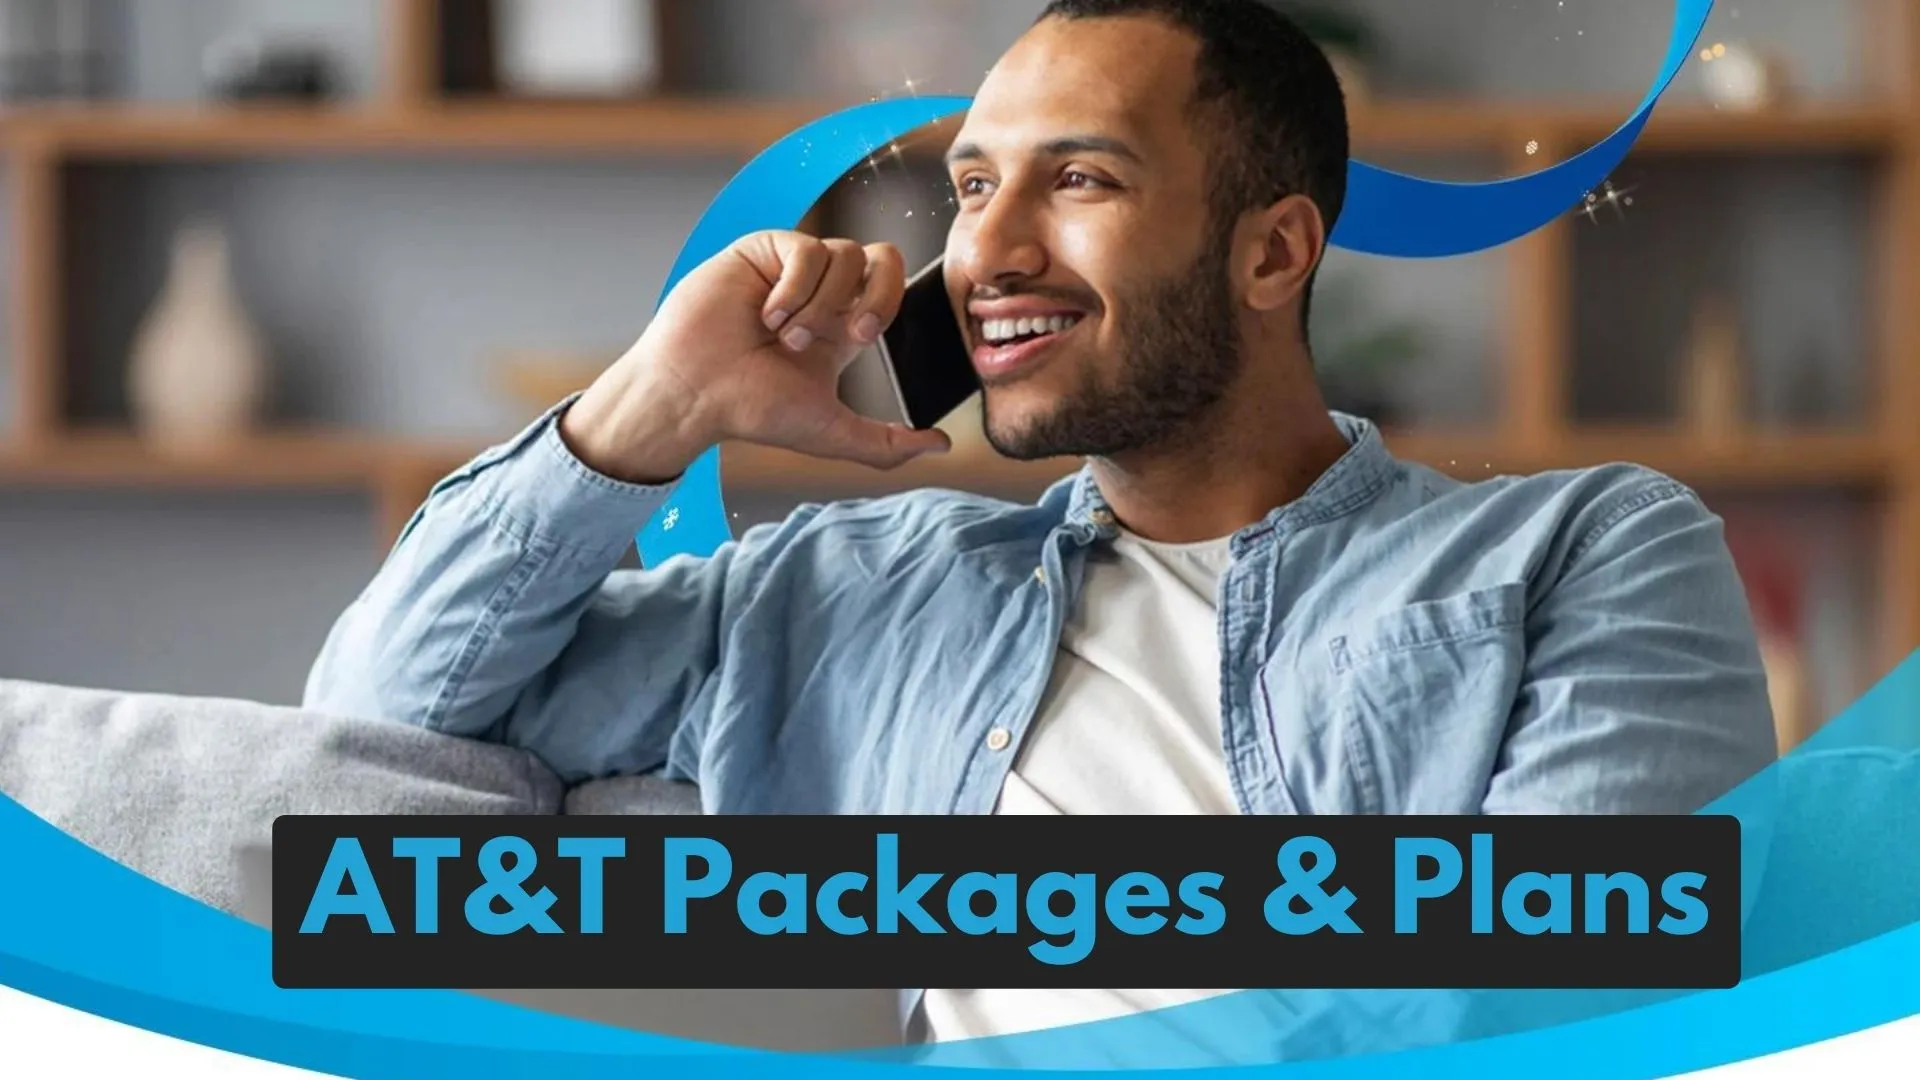 AT&T Packages : Quick Guide To Best AT&T Plans & Packages